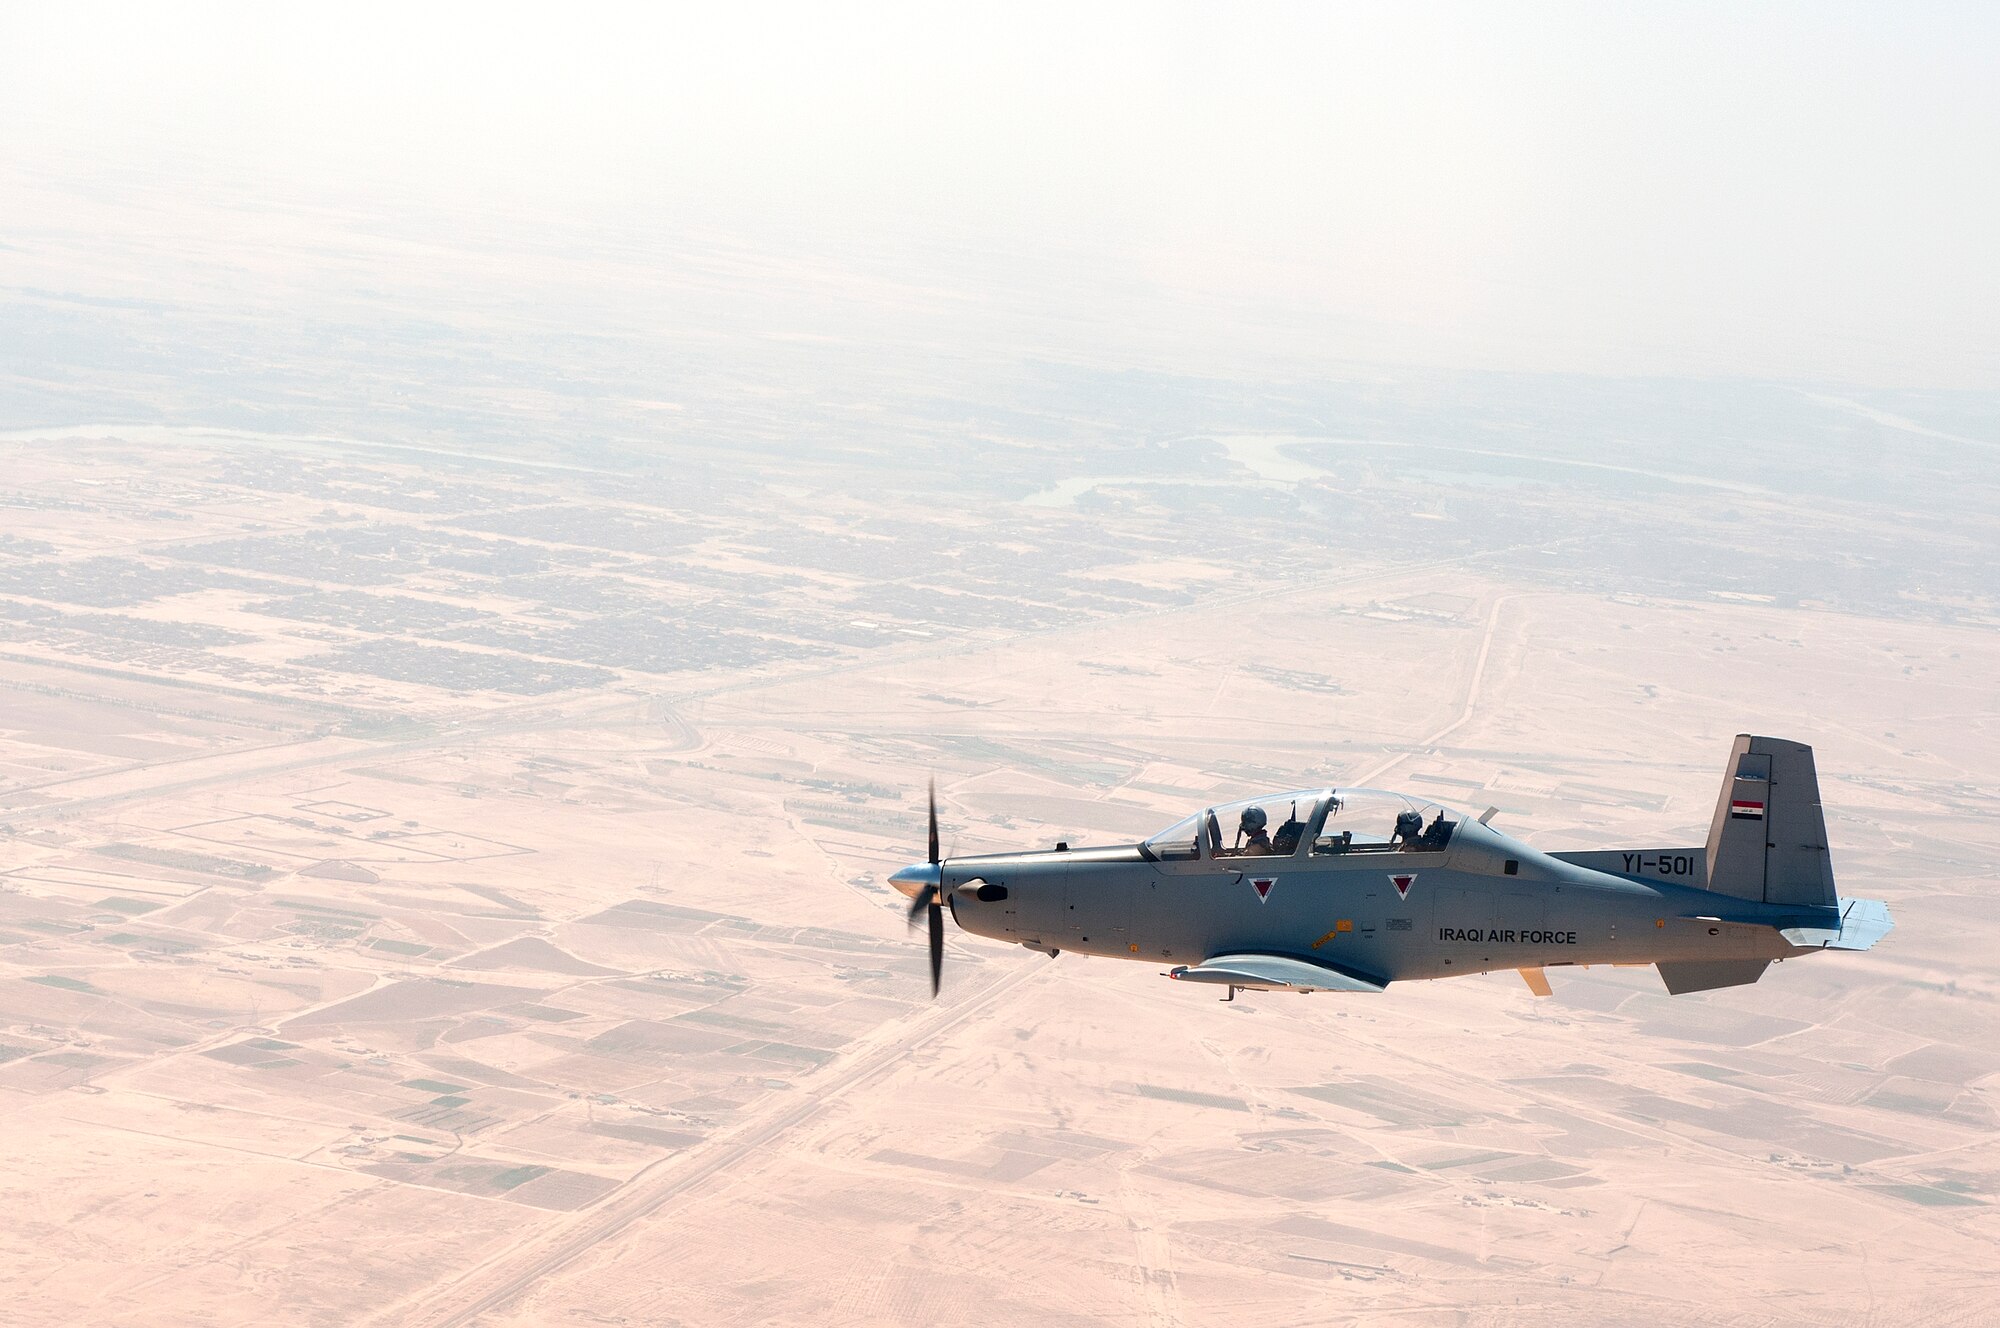 Lt. Col. Theodore Lane, 52nd Expeditionary Flying Training Squadron, instructor pilot, instructs an Iraqi student pilot during a morning sortie over Combat Operation Base Speicher, Tikrit, Iraq on June 29, 2011. This training portion is devoted to graduating Iraqi instructor pilots to achieve the foundation to self sustain Iraqi air power.The primary aircraft for training is the T-6 Texan. (U.S. Air Force photo by Staff Sgt. Jose Rodriguez/Released)